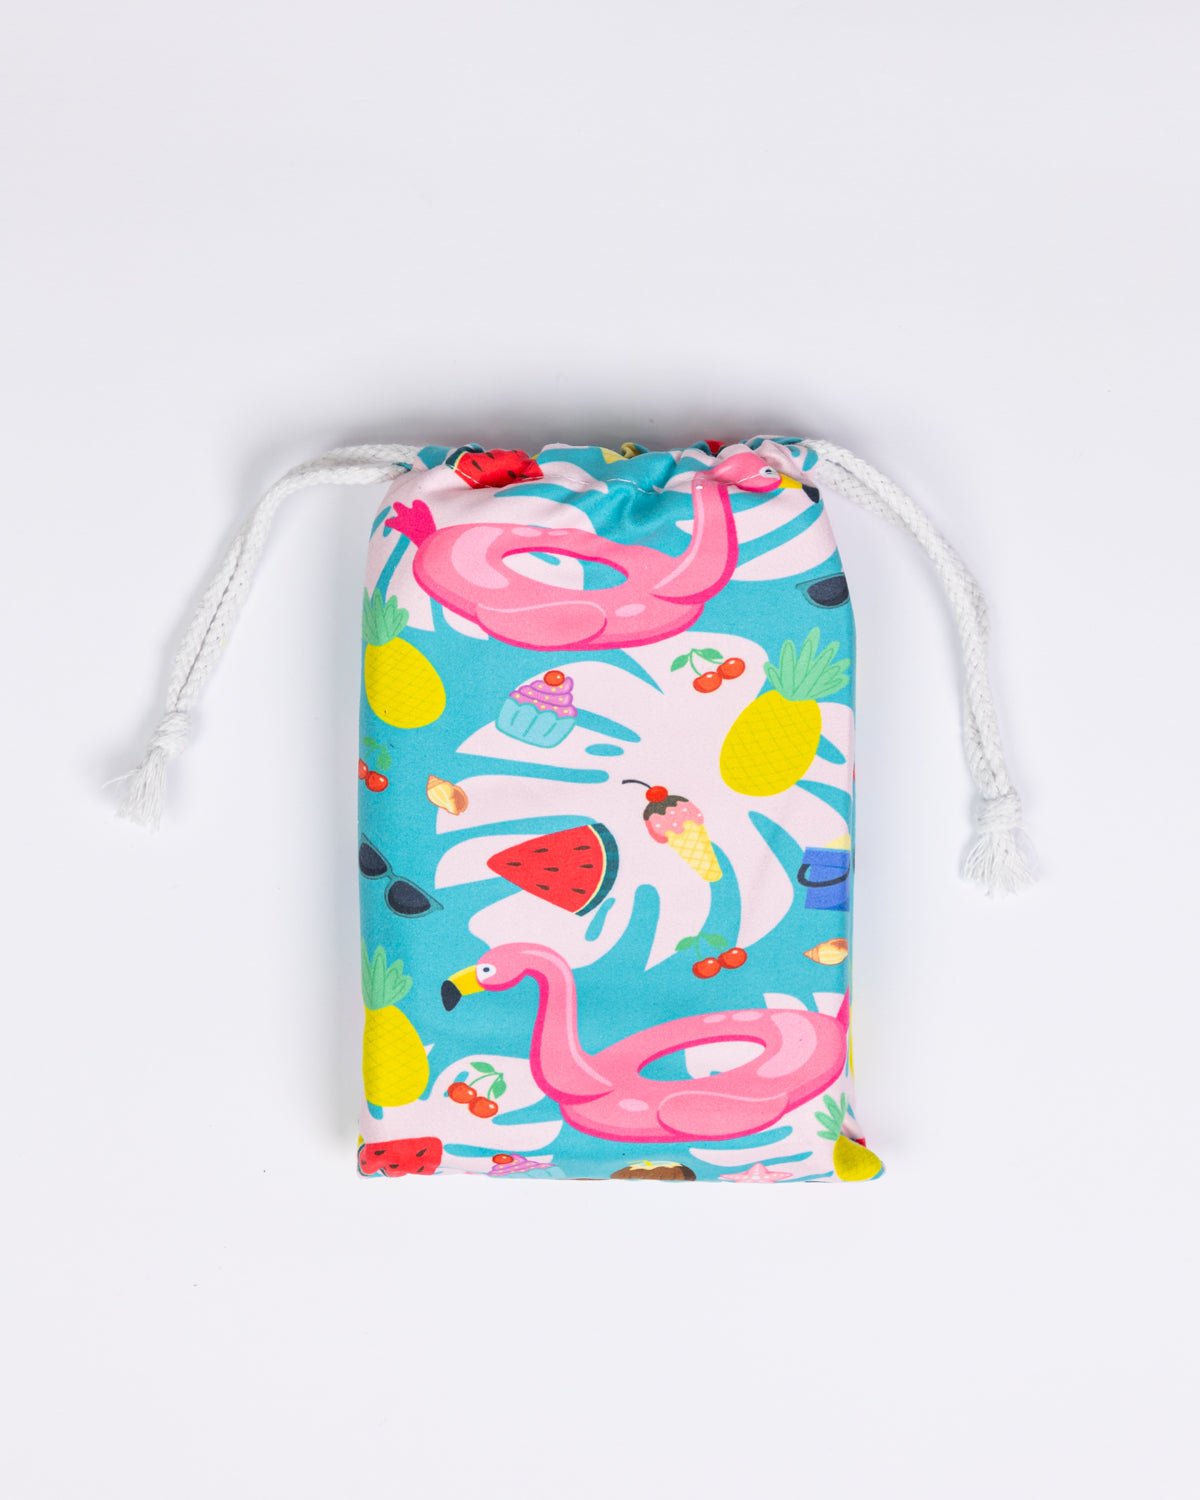 a Quick Dry, Sand Free, Light Weight, Compact and Ecofriendly Microfiber Beach Towel Pouch from La Toalla